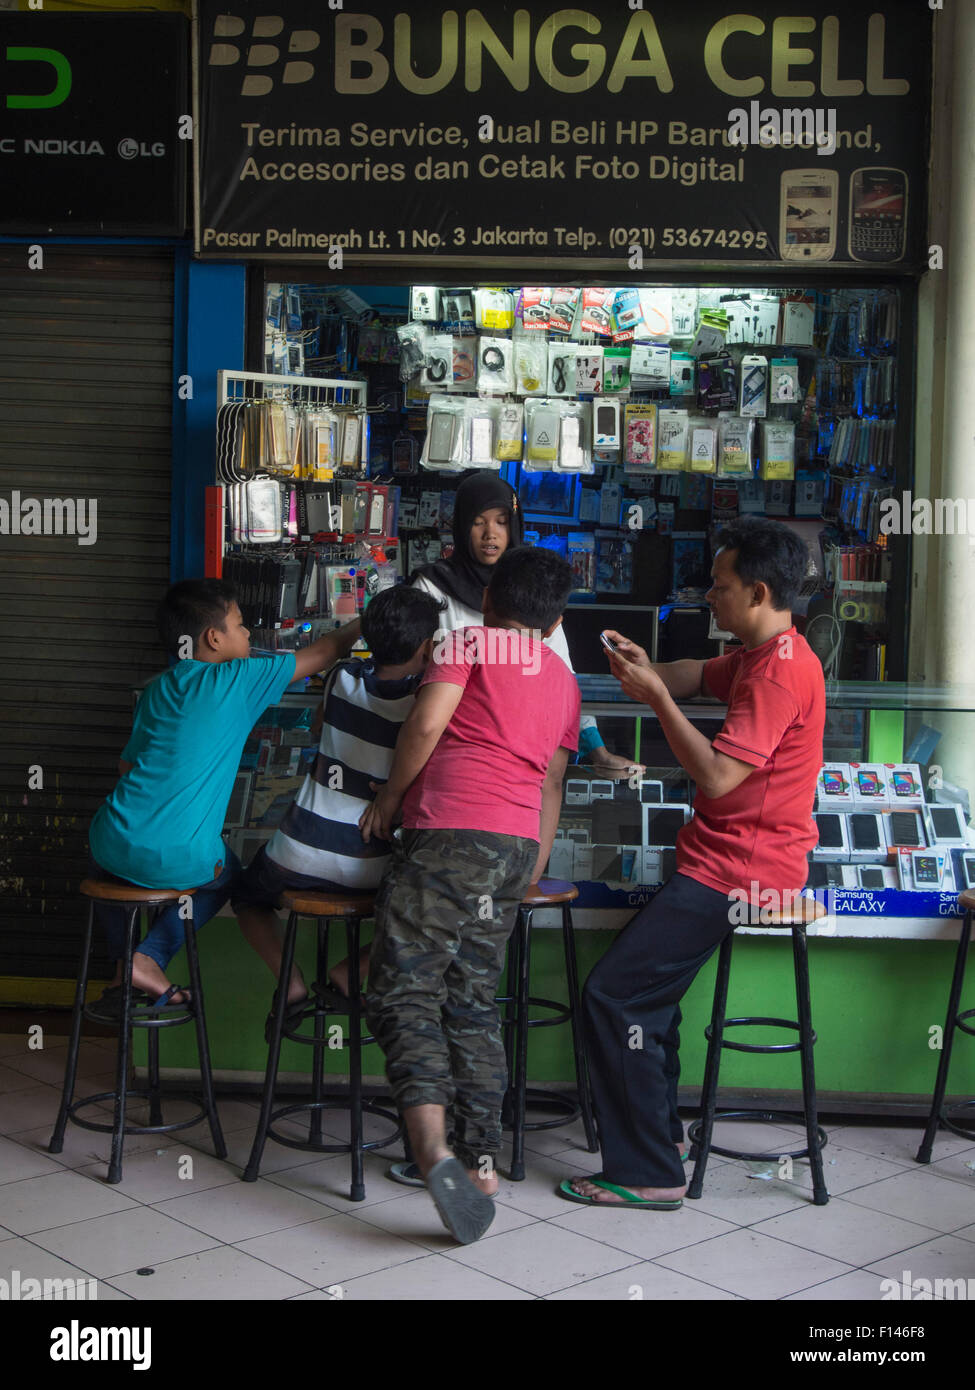 Mobile phone stall in a market place in Jakarta, Indonesia Stock Photo